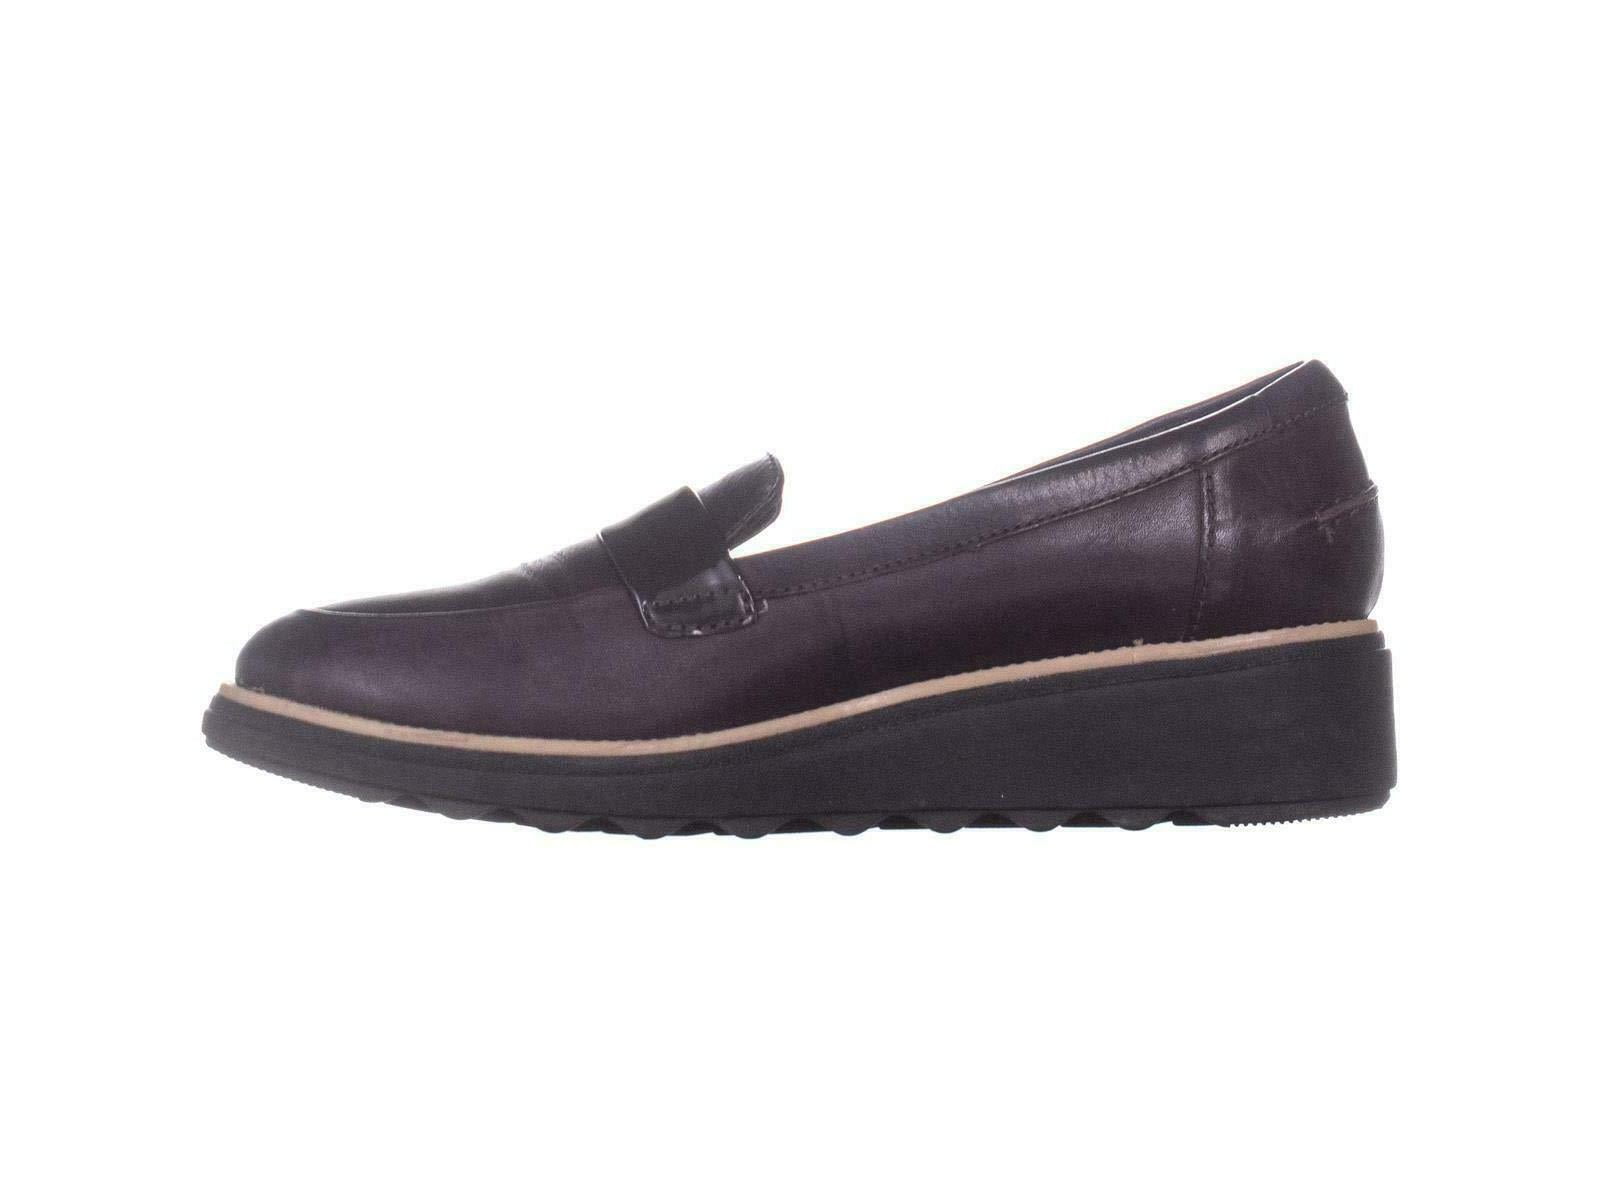 Clarks Ladies Casual Slip On Shoes Sharon Gracie 